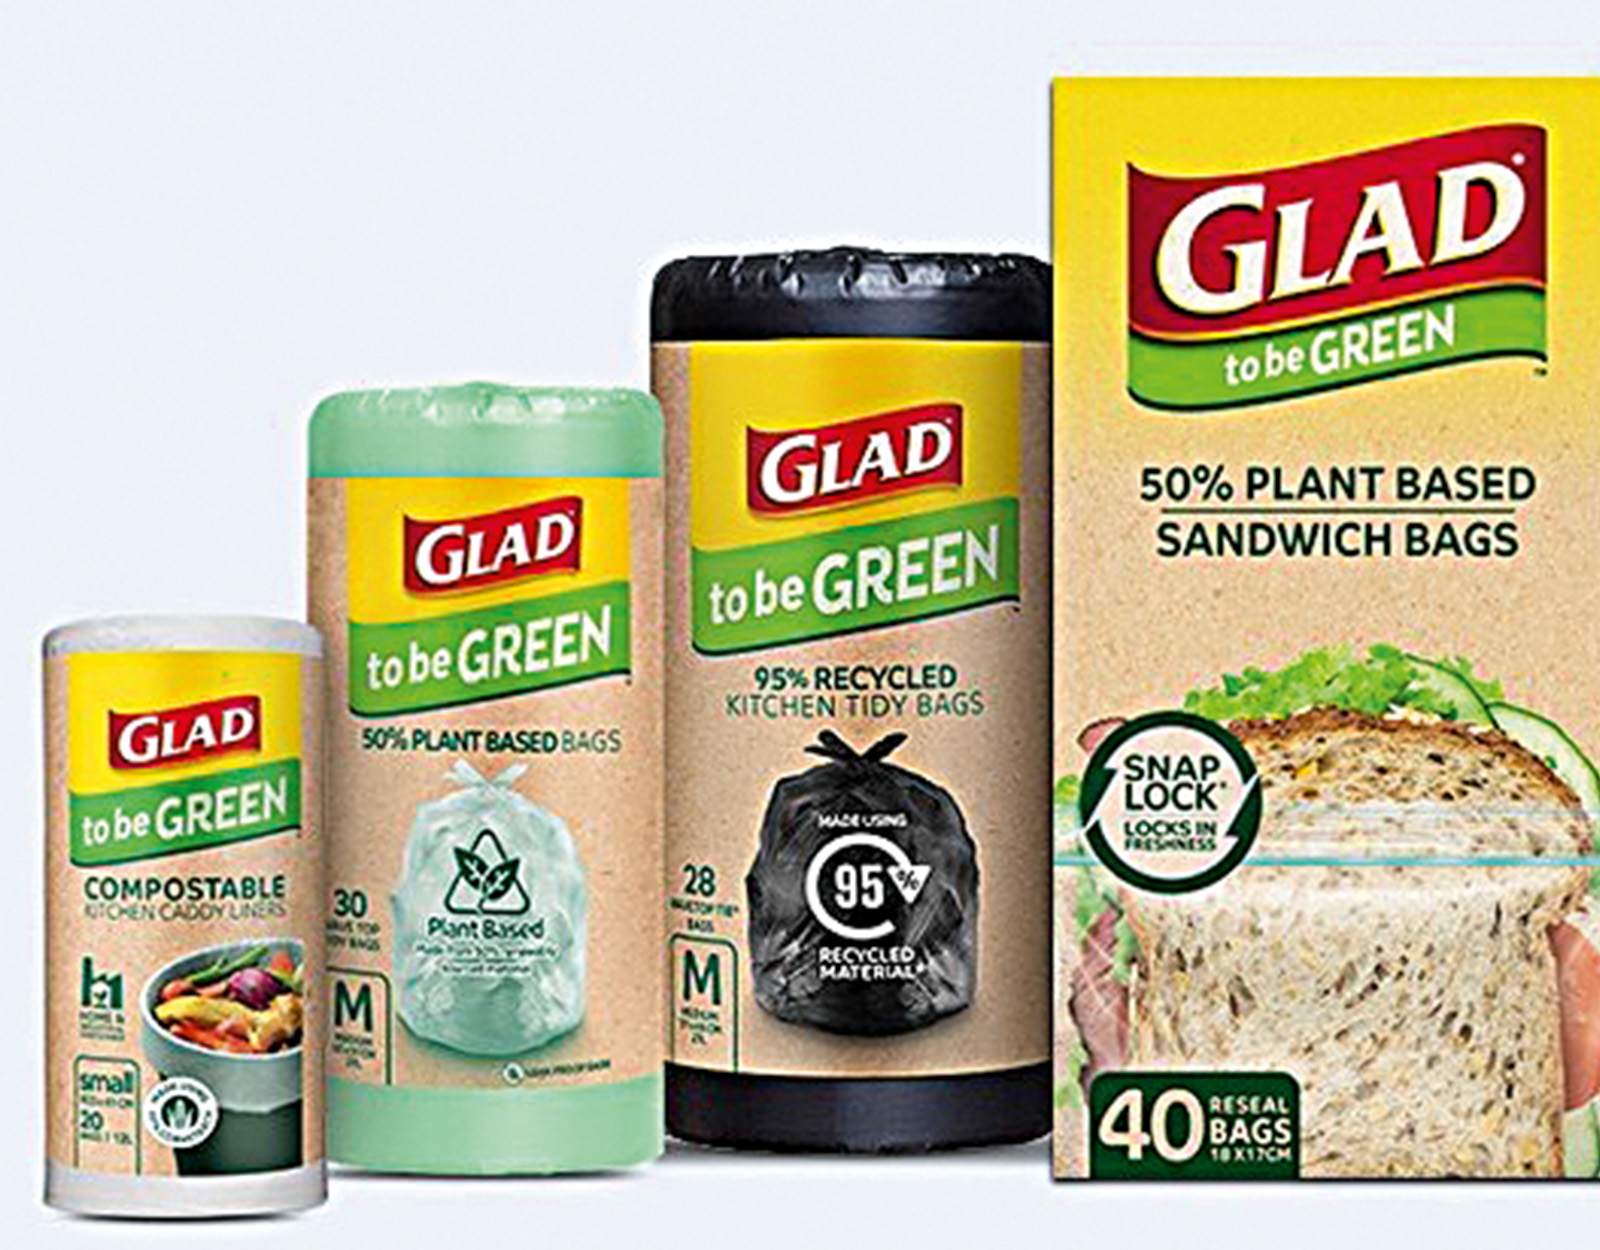 Glad to be Green sandwich bags